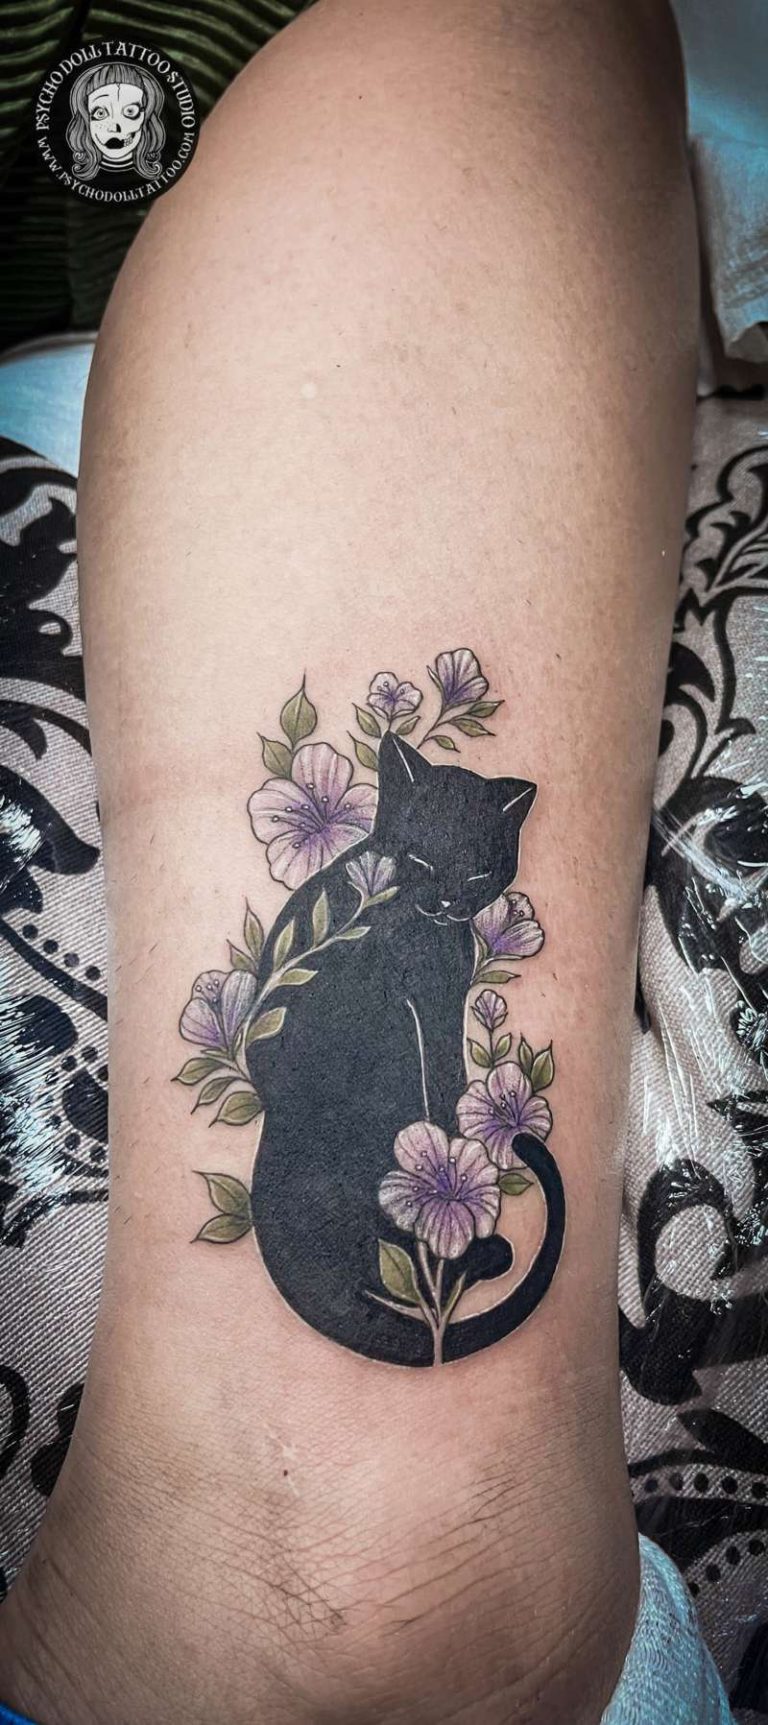 Cover up tattoo with cat and flowers